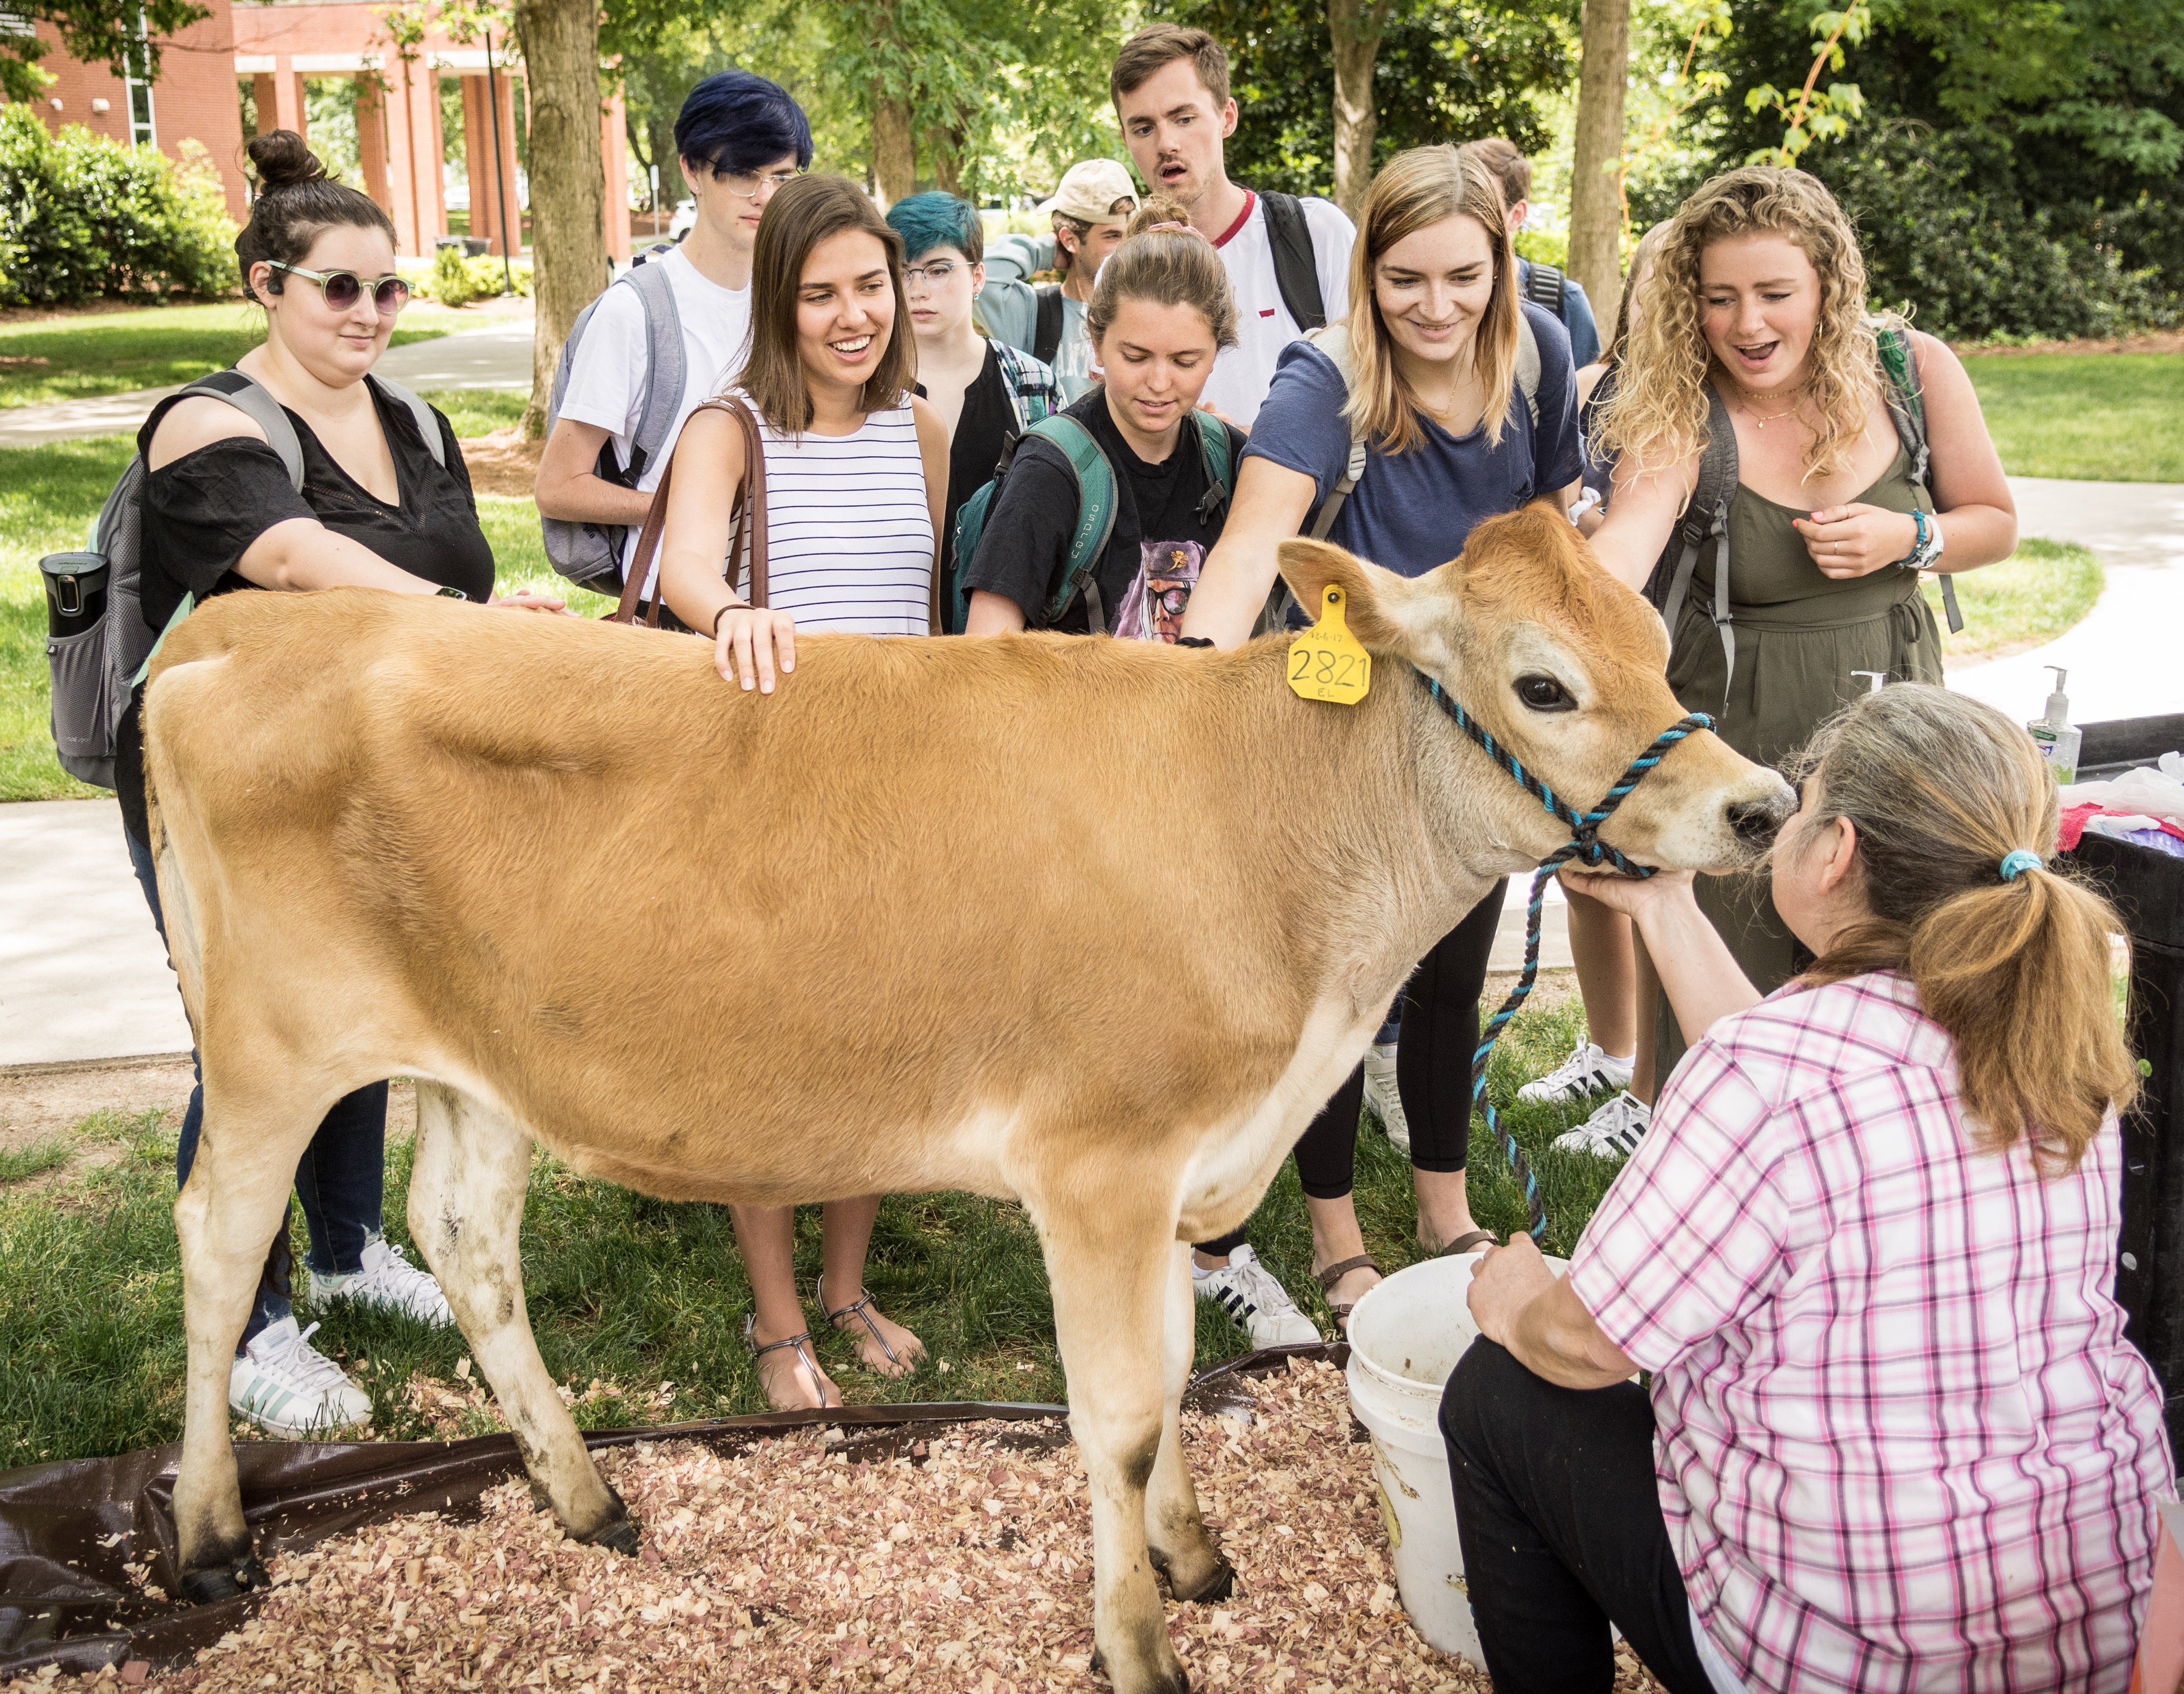 A 17-month-old calf visited Elon University as part of a pop-up event where students got to taste locally produced smoothies and yogurt, and also learned about dairy production.